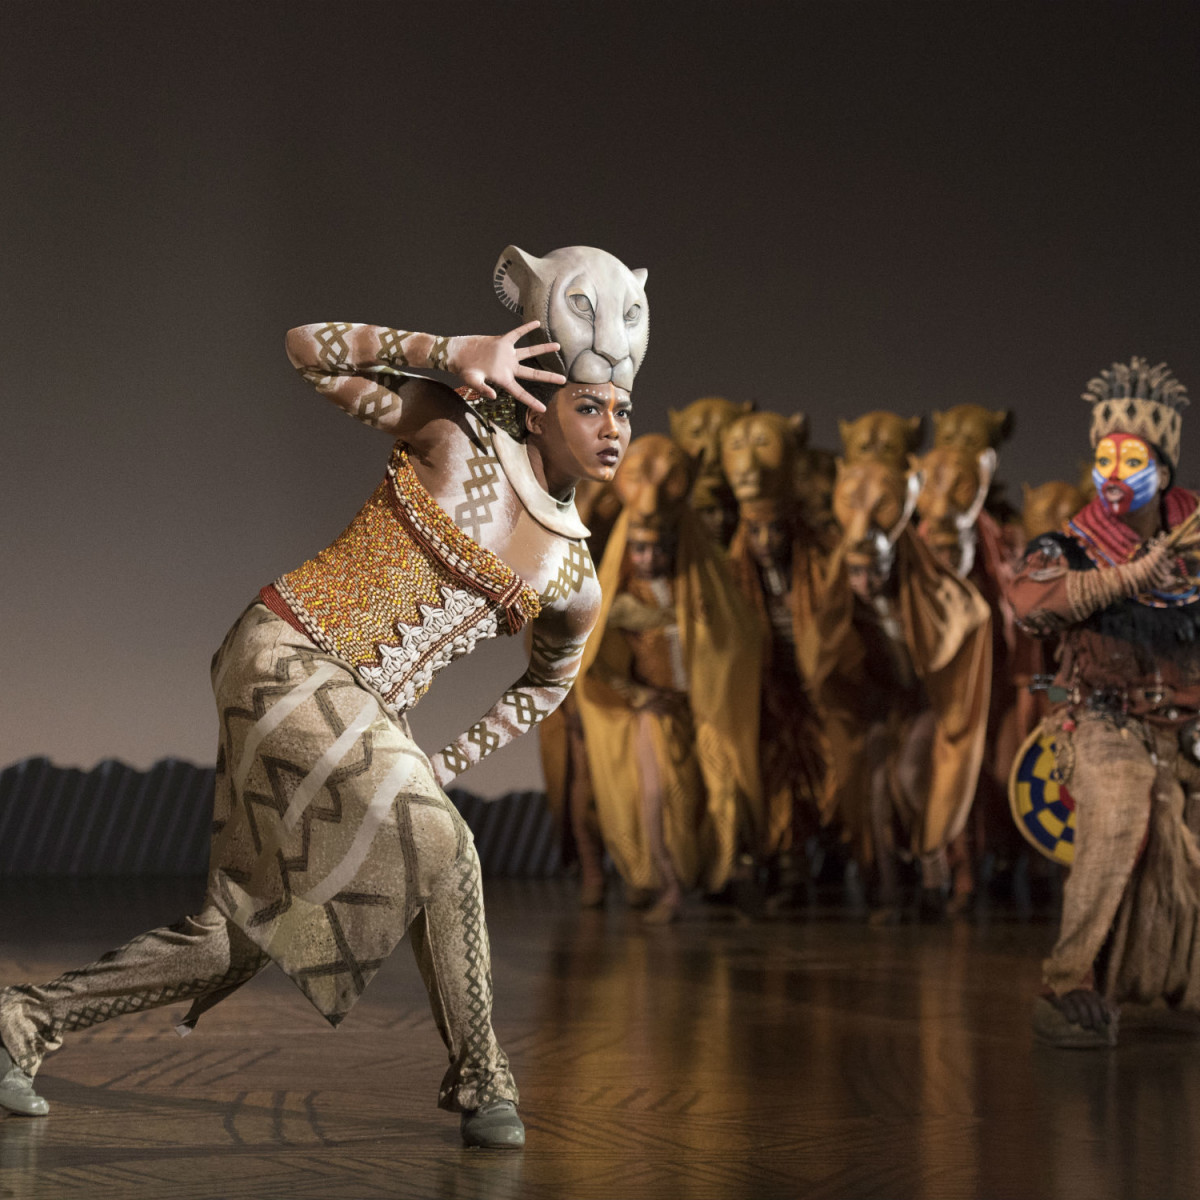 Jawdropping technical wizardry makes The Lion King a musical mustsee